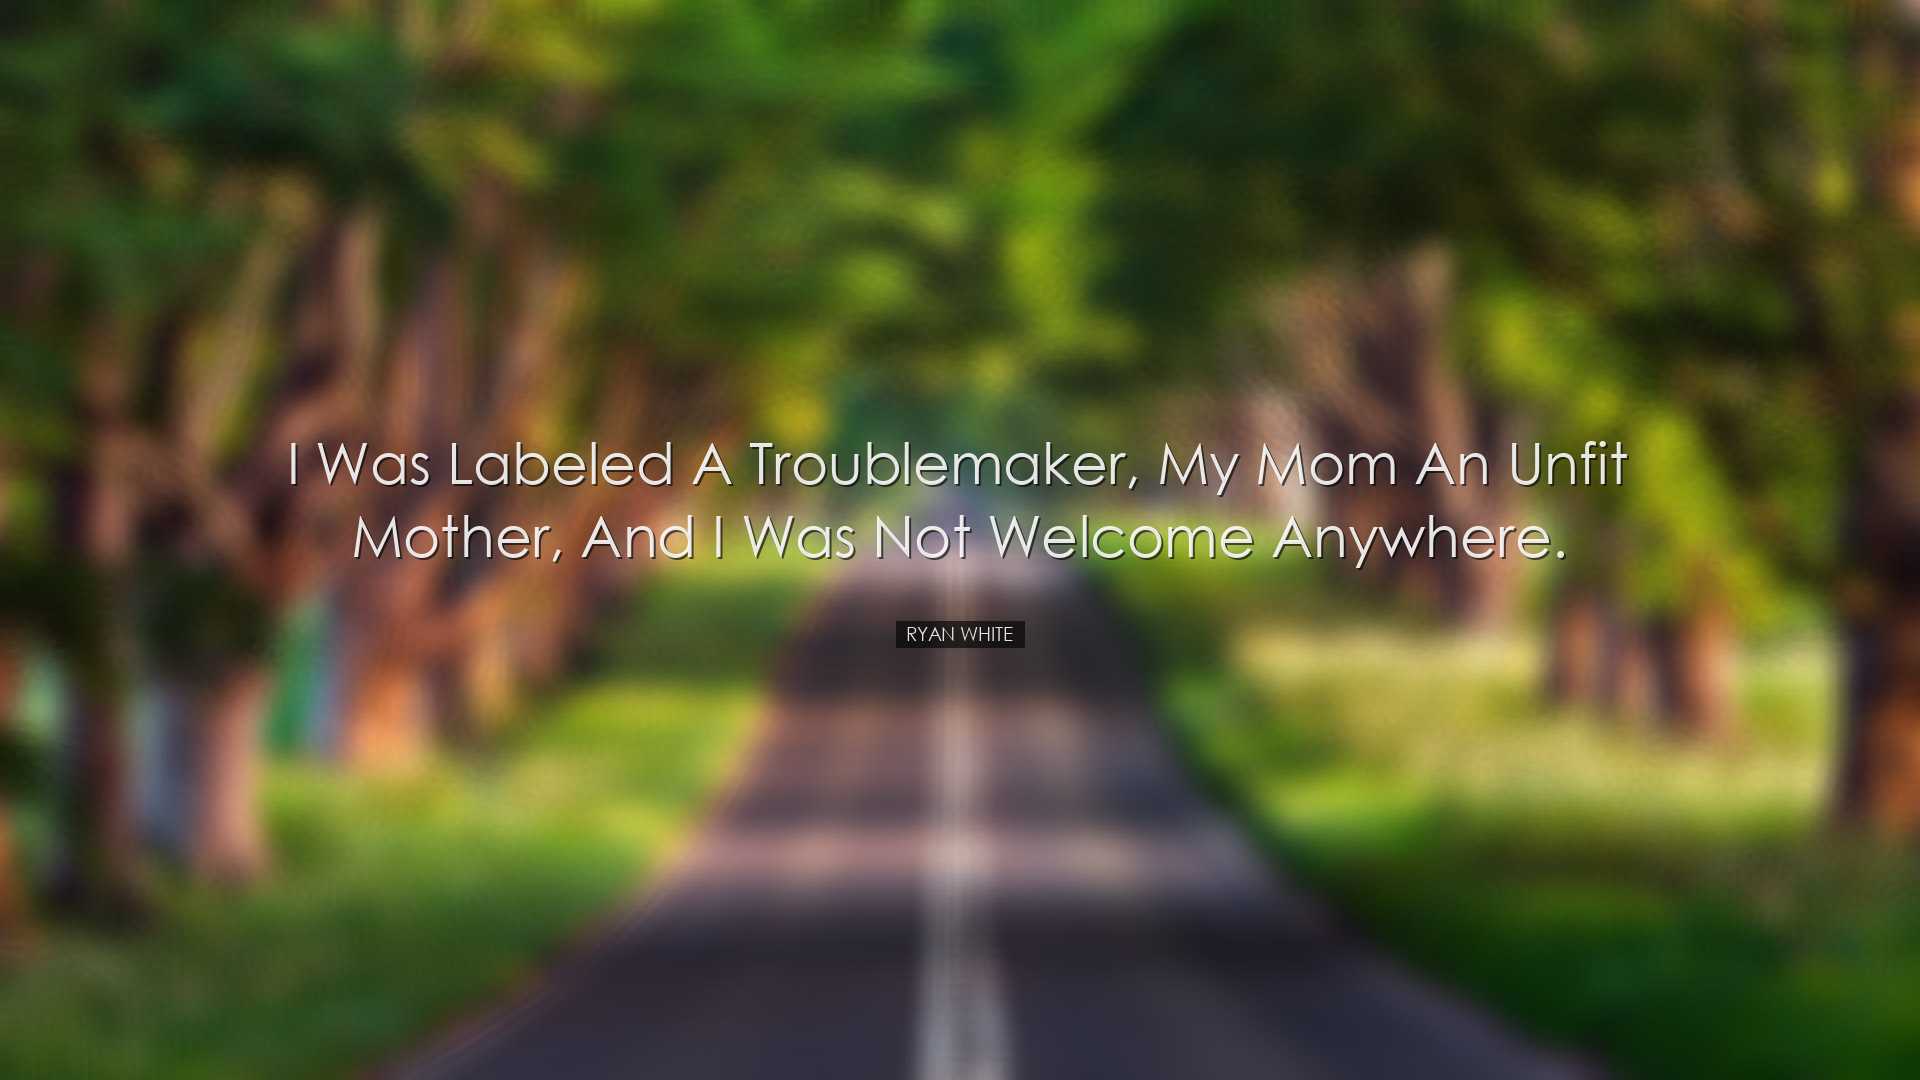 I was labeled a troublemaker, my mom an unfit mother, and I was no